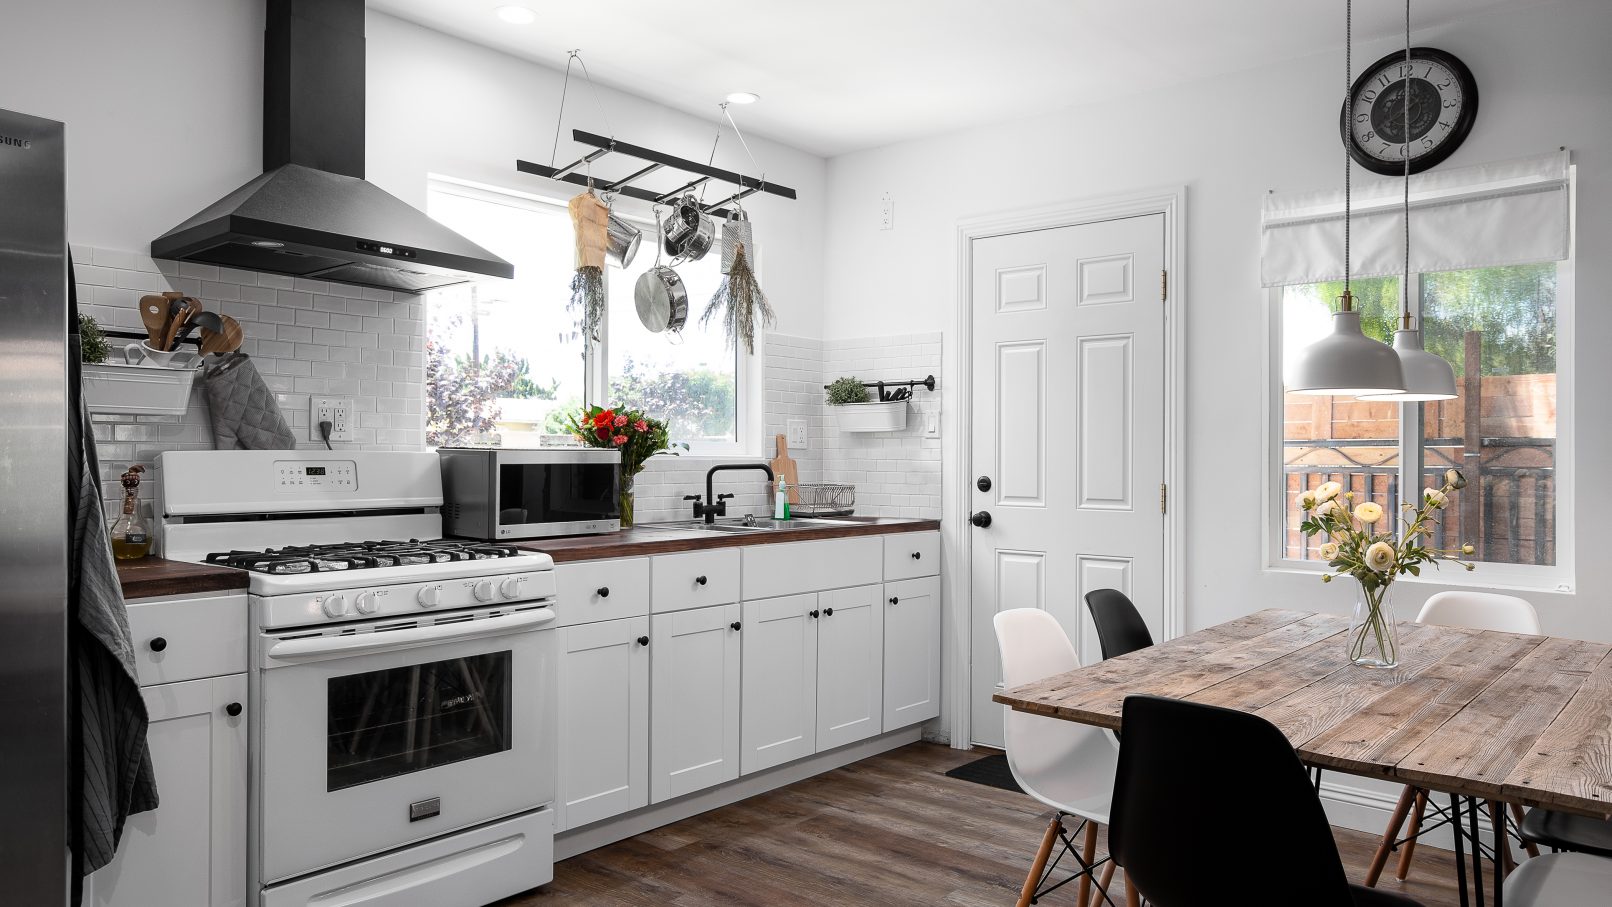 Interior Design Photography in Orange County California of a white kitchen in a modern farmhouse style with Eames chairs around a kitchen table and herbs hanging just above the stainless steel farmhouse sink